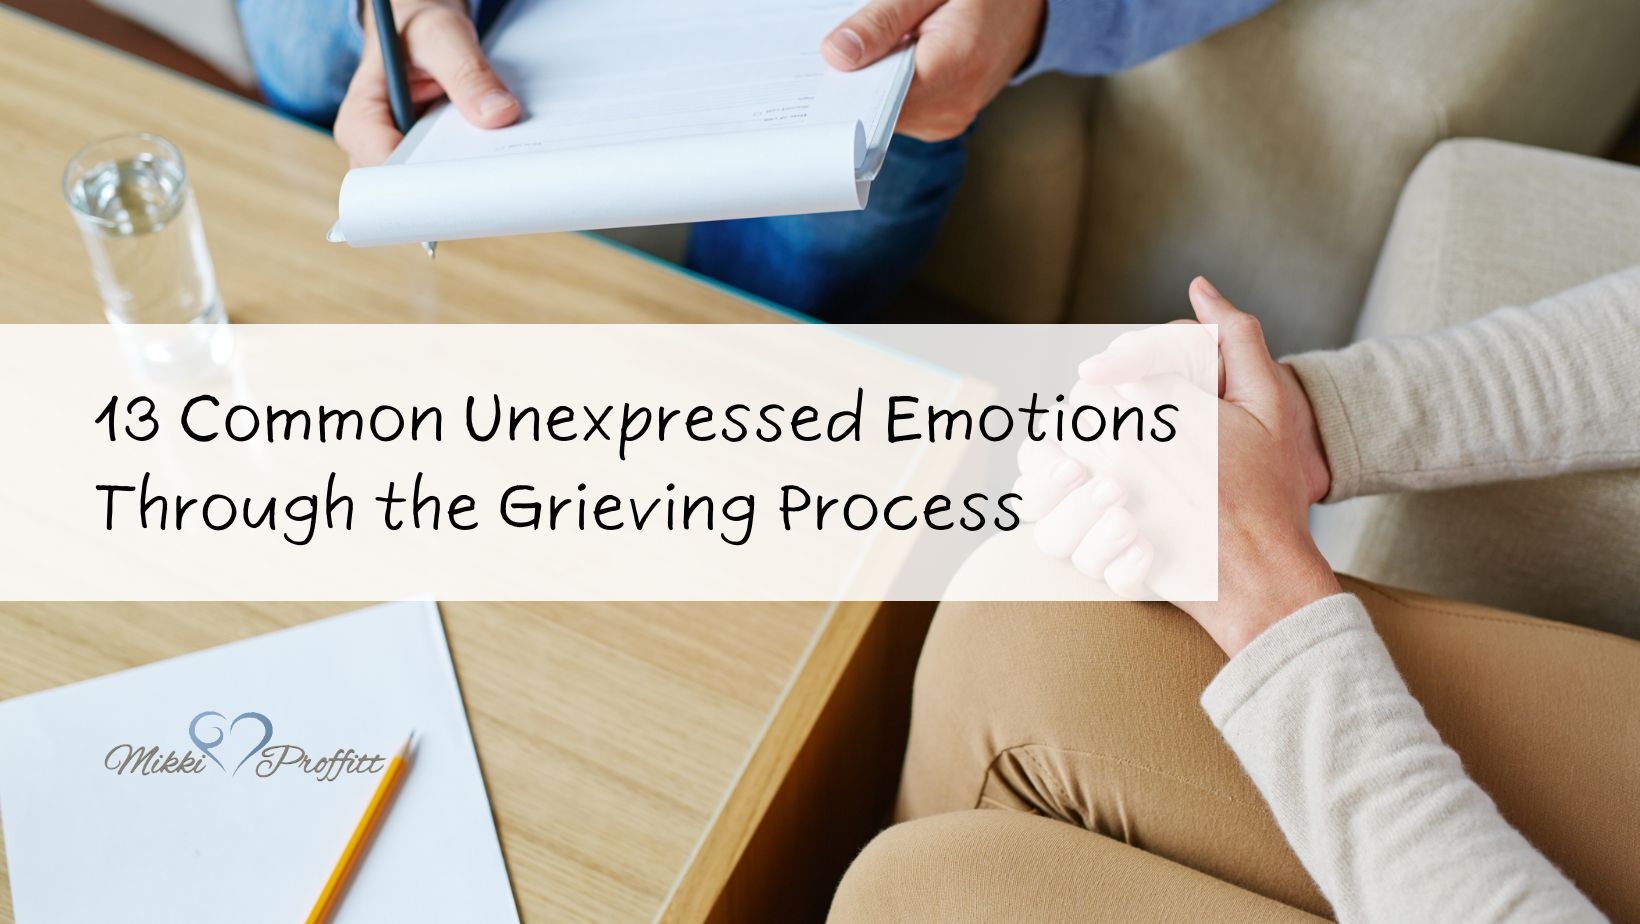 13 common unexpressed emotions through the grieving process